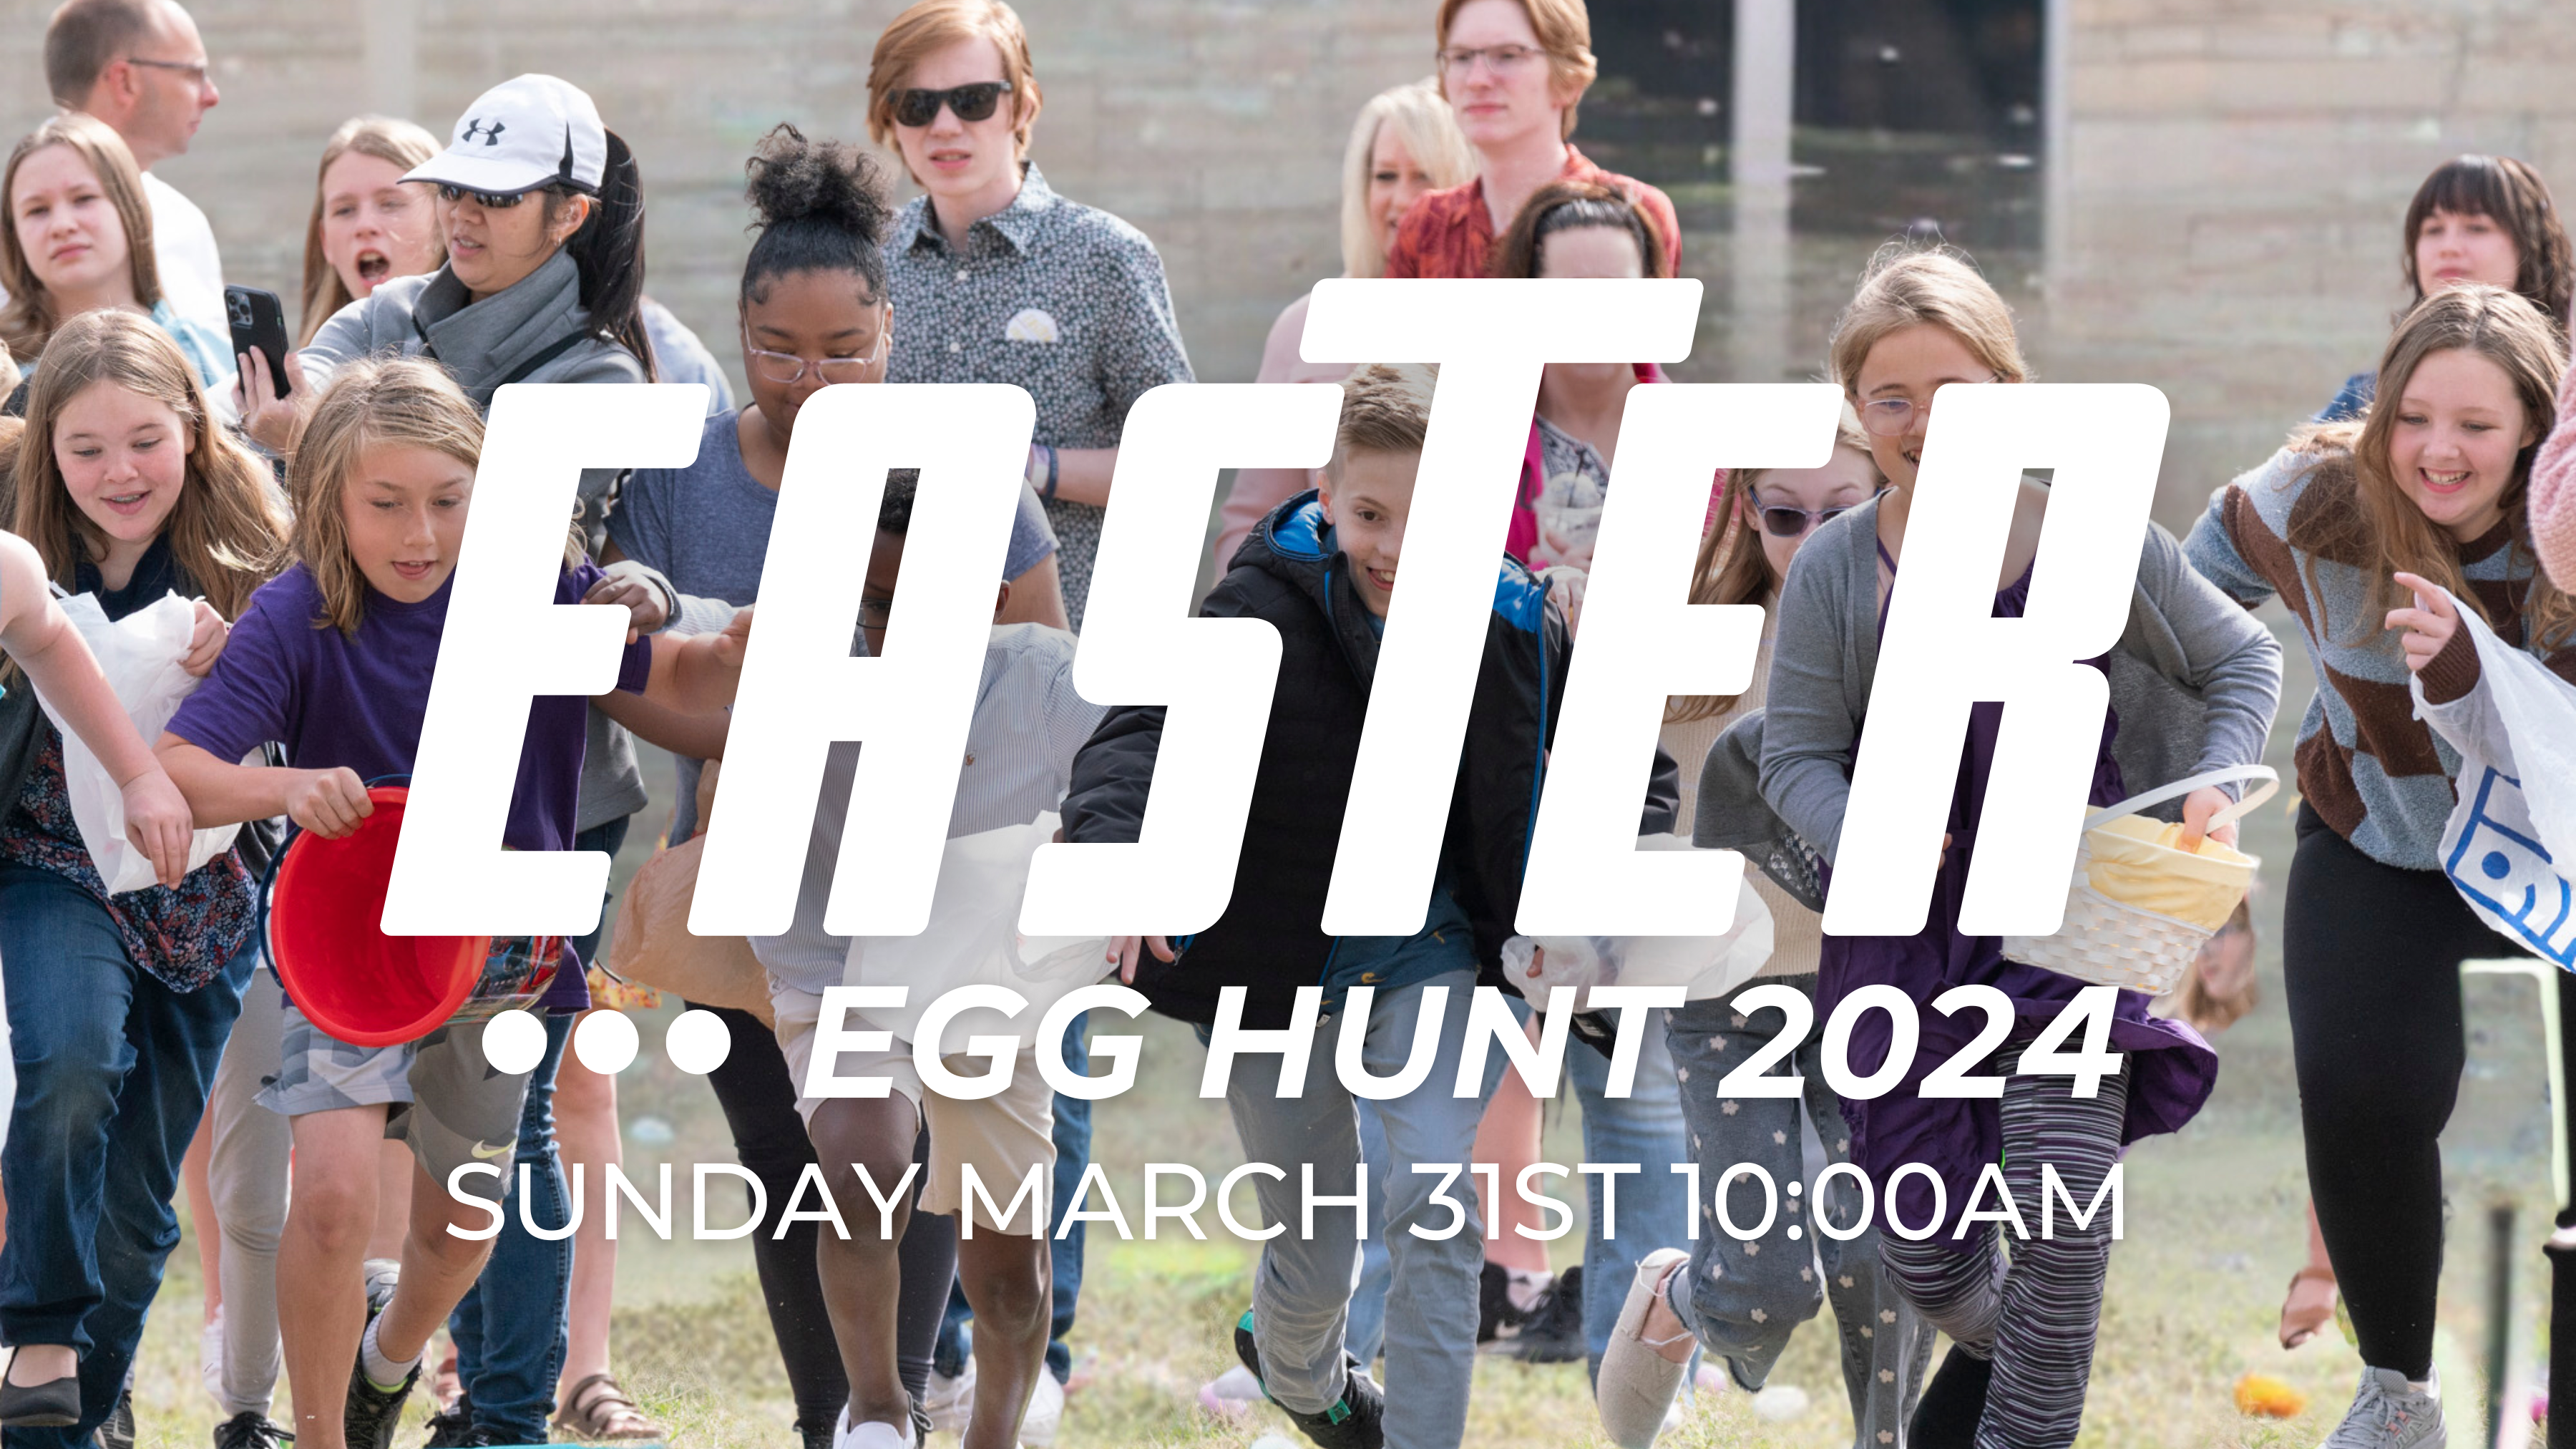 Easter Egg Hunt date and time